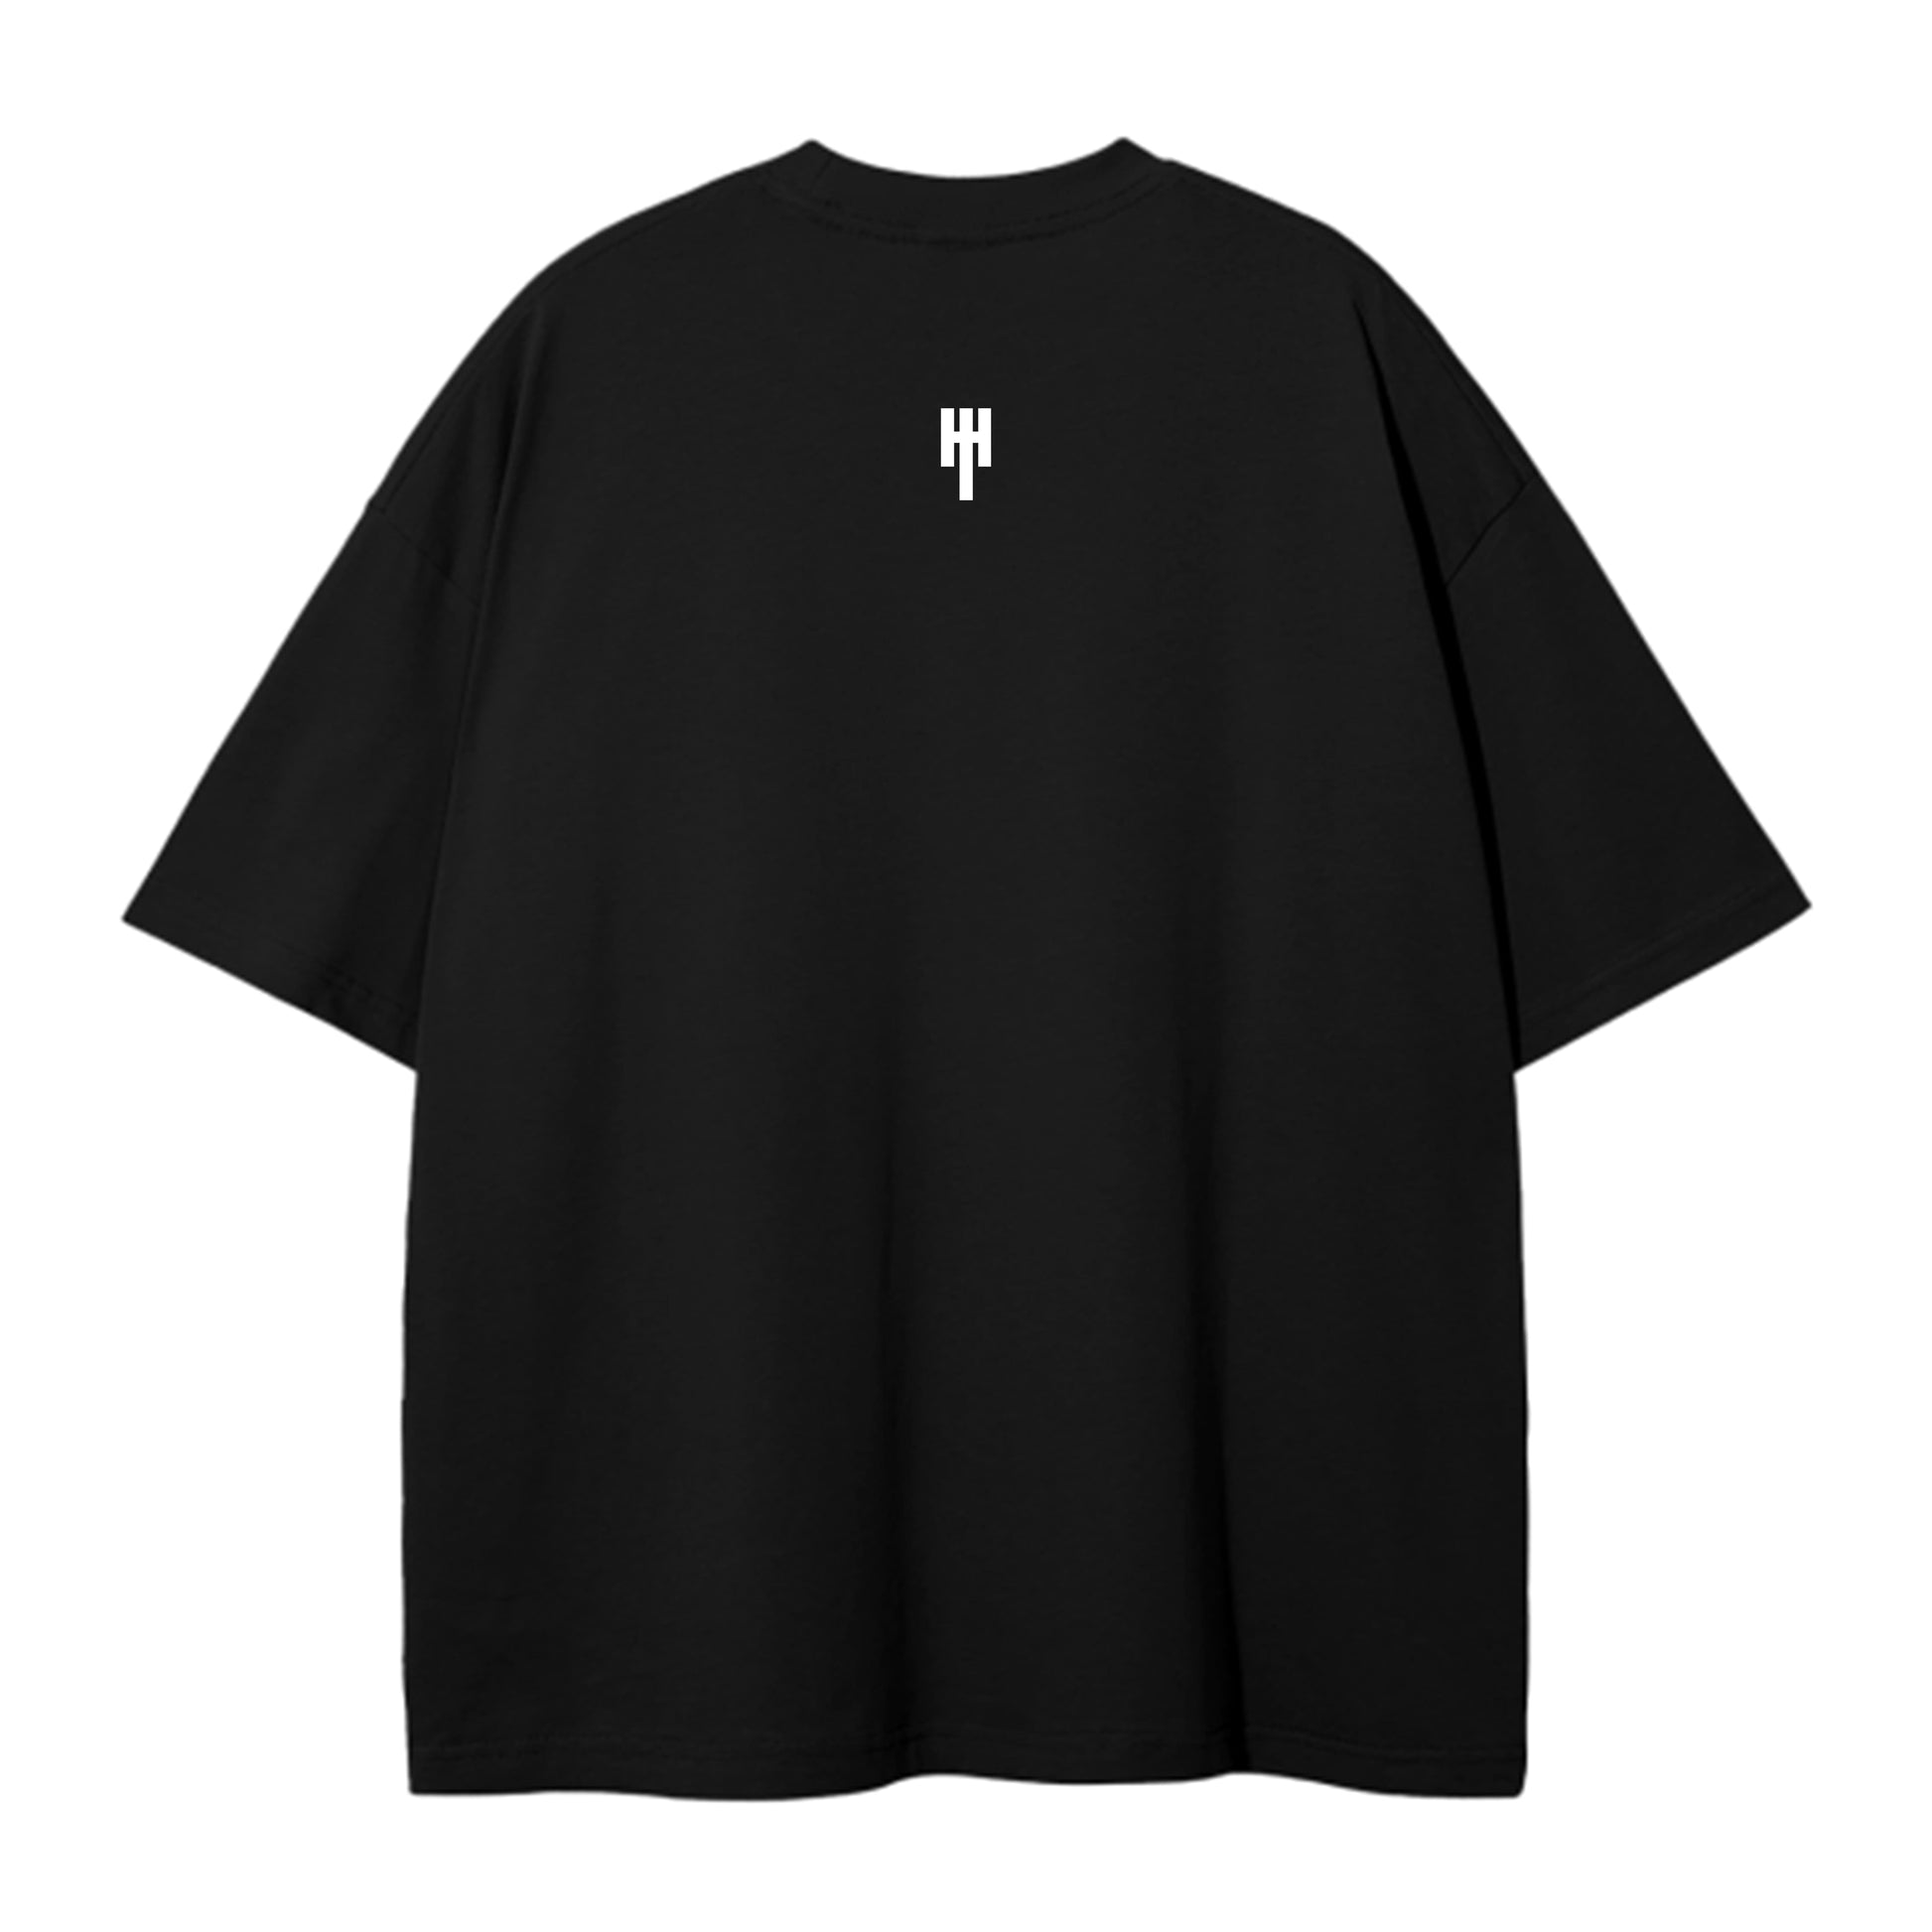 Back view of an oversized black t-shirt with our company emblem centered beneath the neckline.